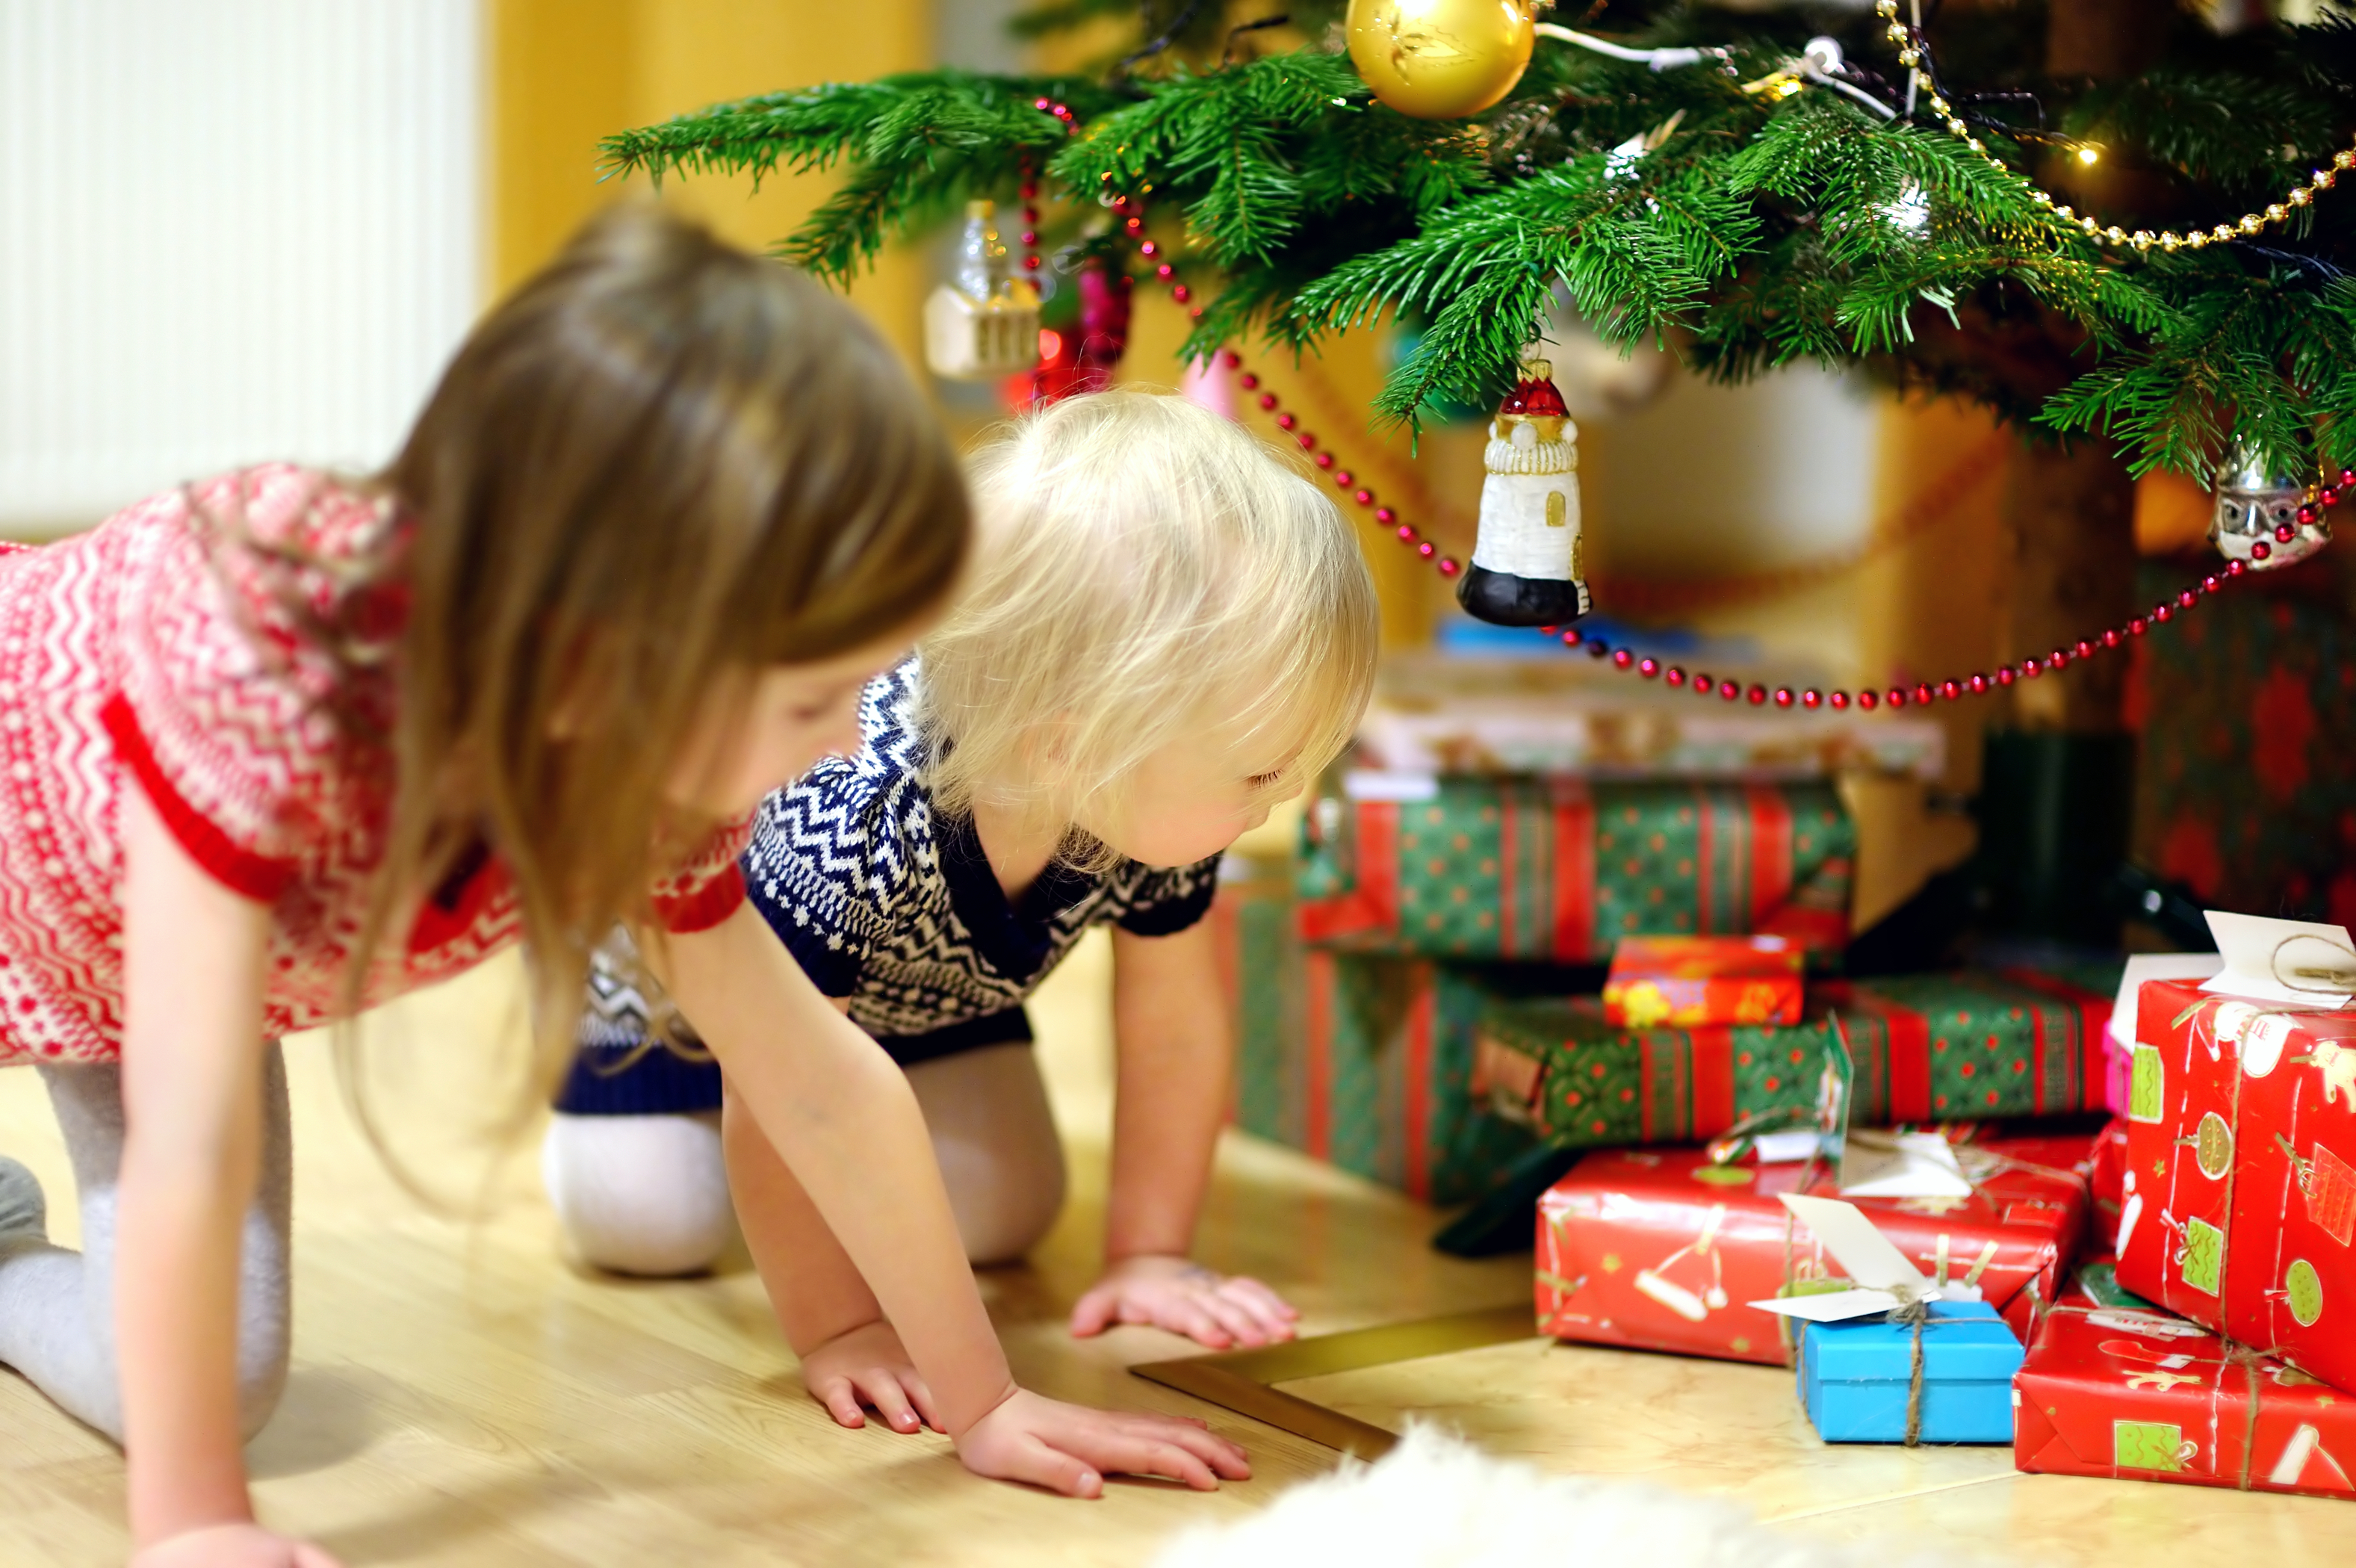 Two little sisters looking for gifts under a Christmas tree | Source: Shutterstock